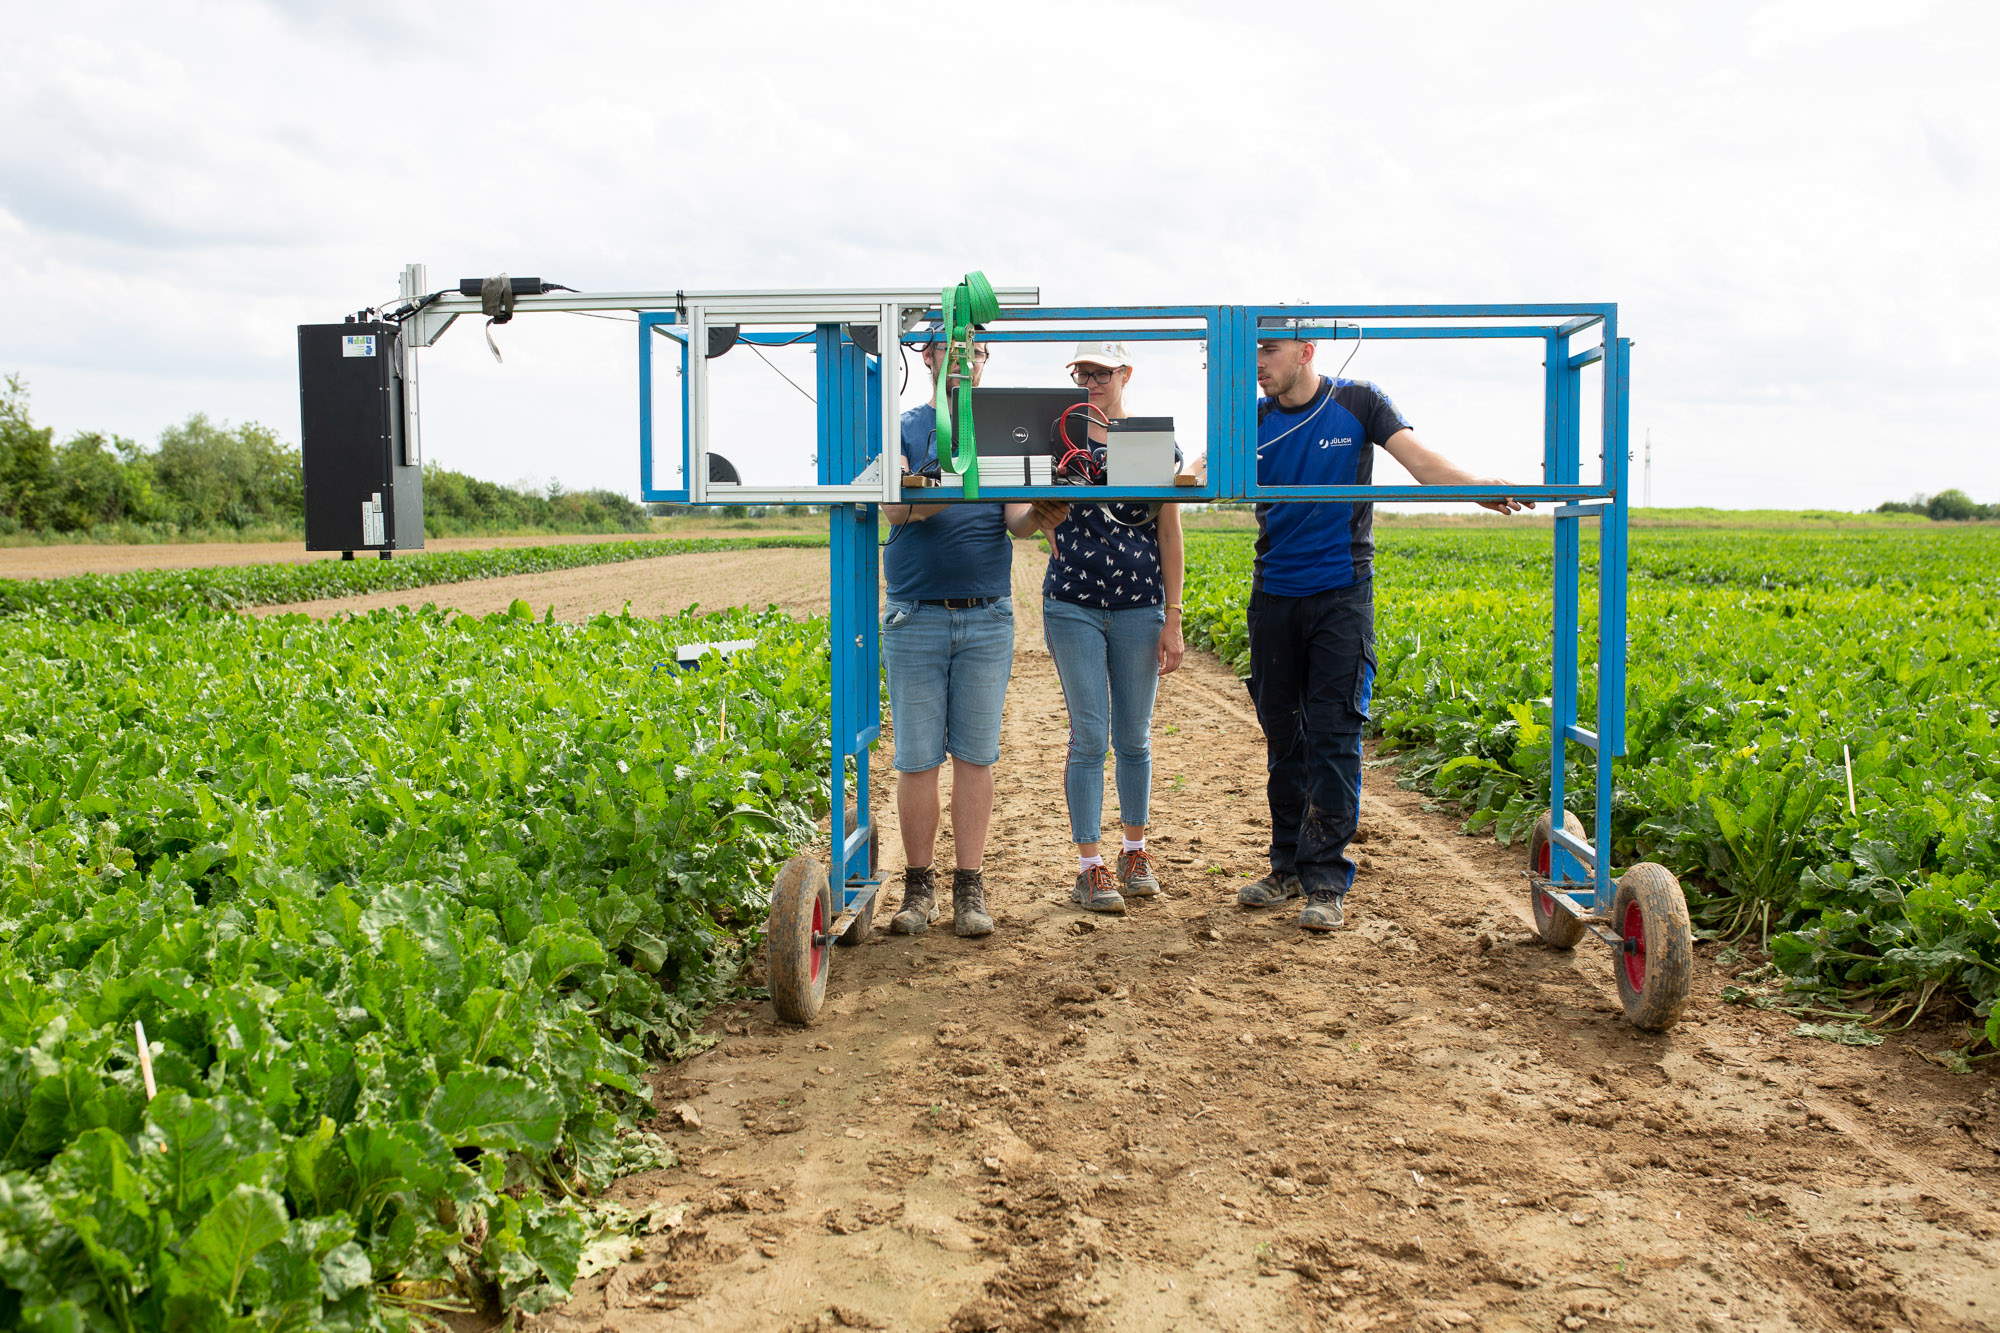 Forschungszentrum Jülich collects data on the infestation of sugar beet with the fungus Cercospora using the Lift system, which is mounted on a blue trolley. KWS test field in Plattling (Bavaria).